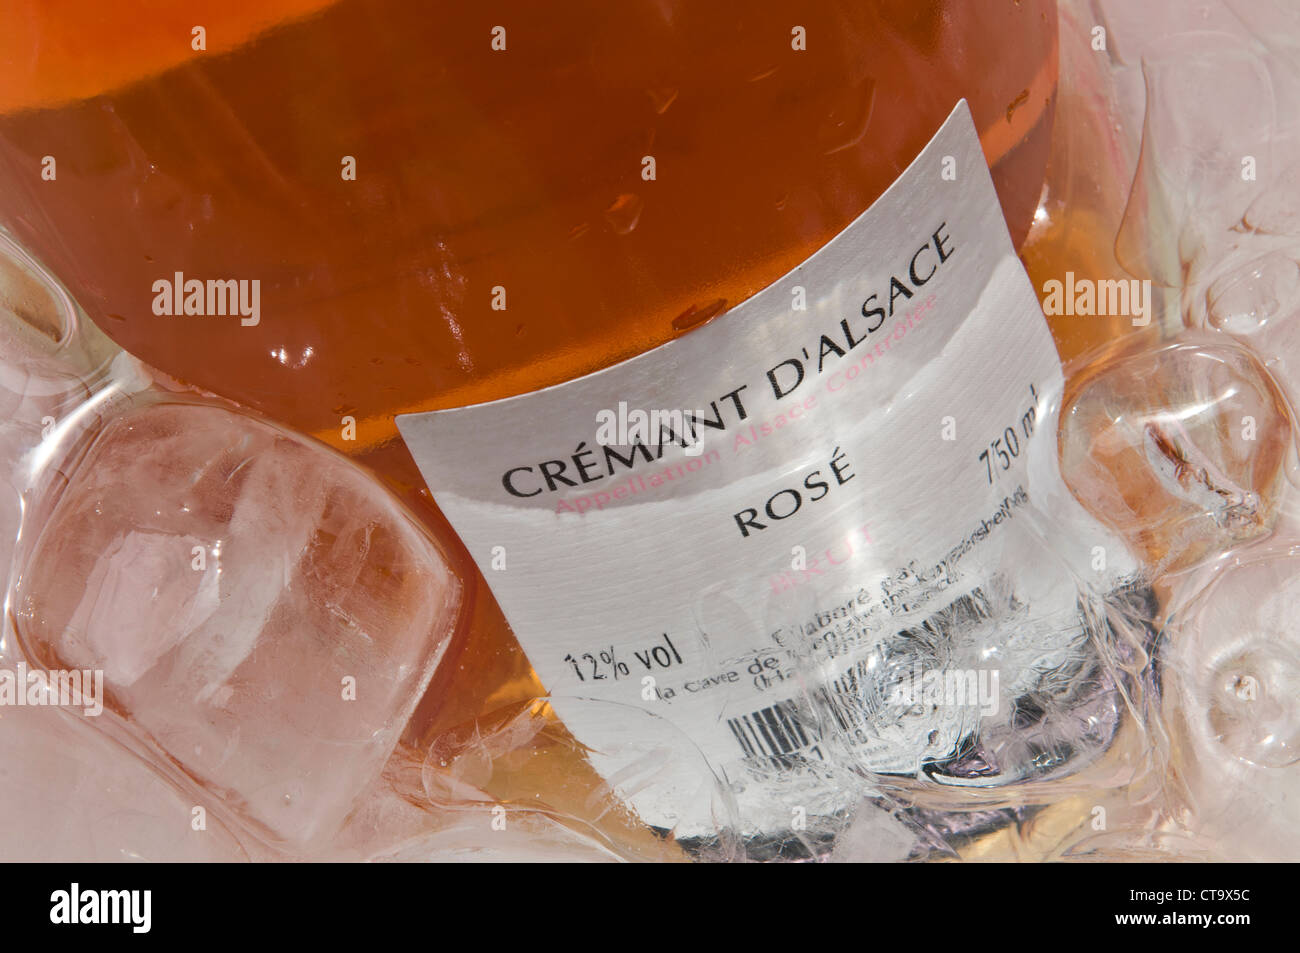 Close view on 'Cremant d'Alsace ' sparkling rose wine bottle label in ice cooler Stock Photo